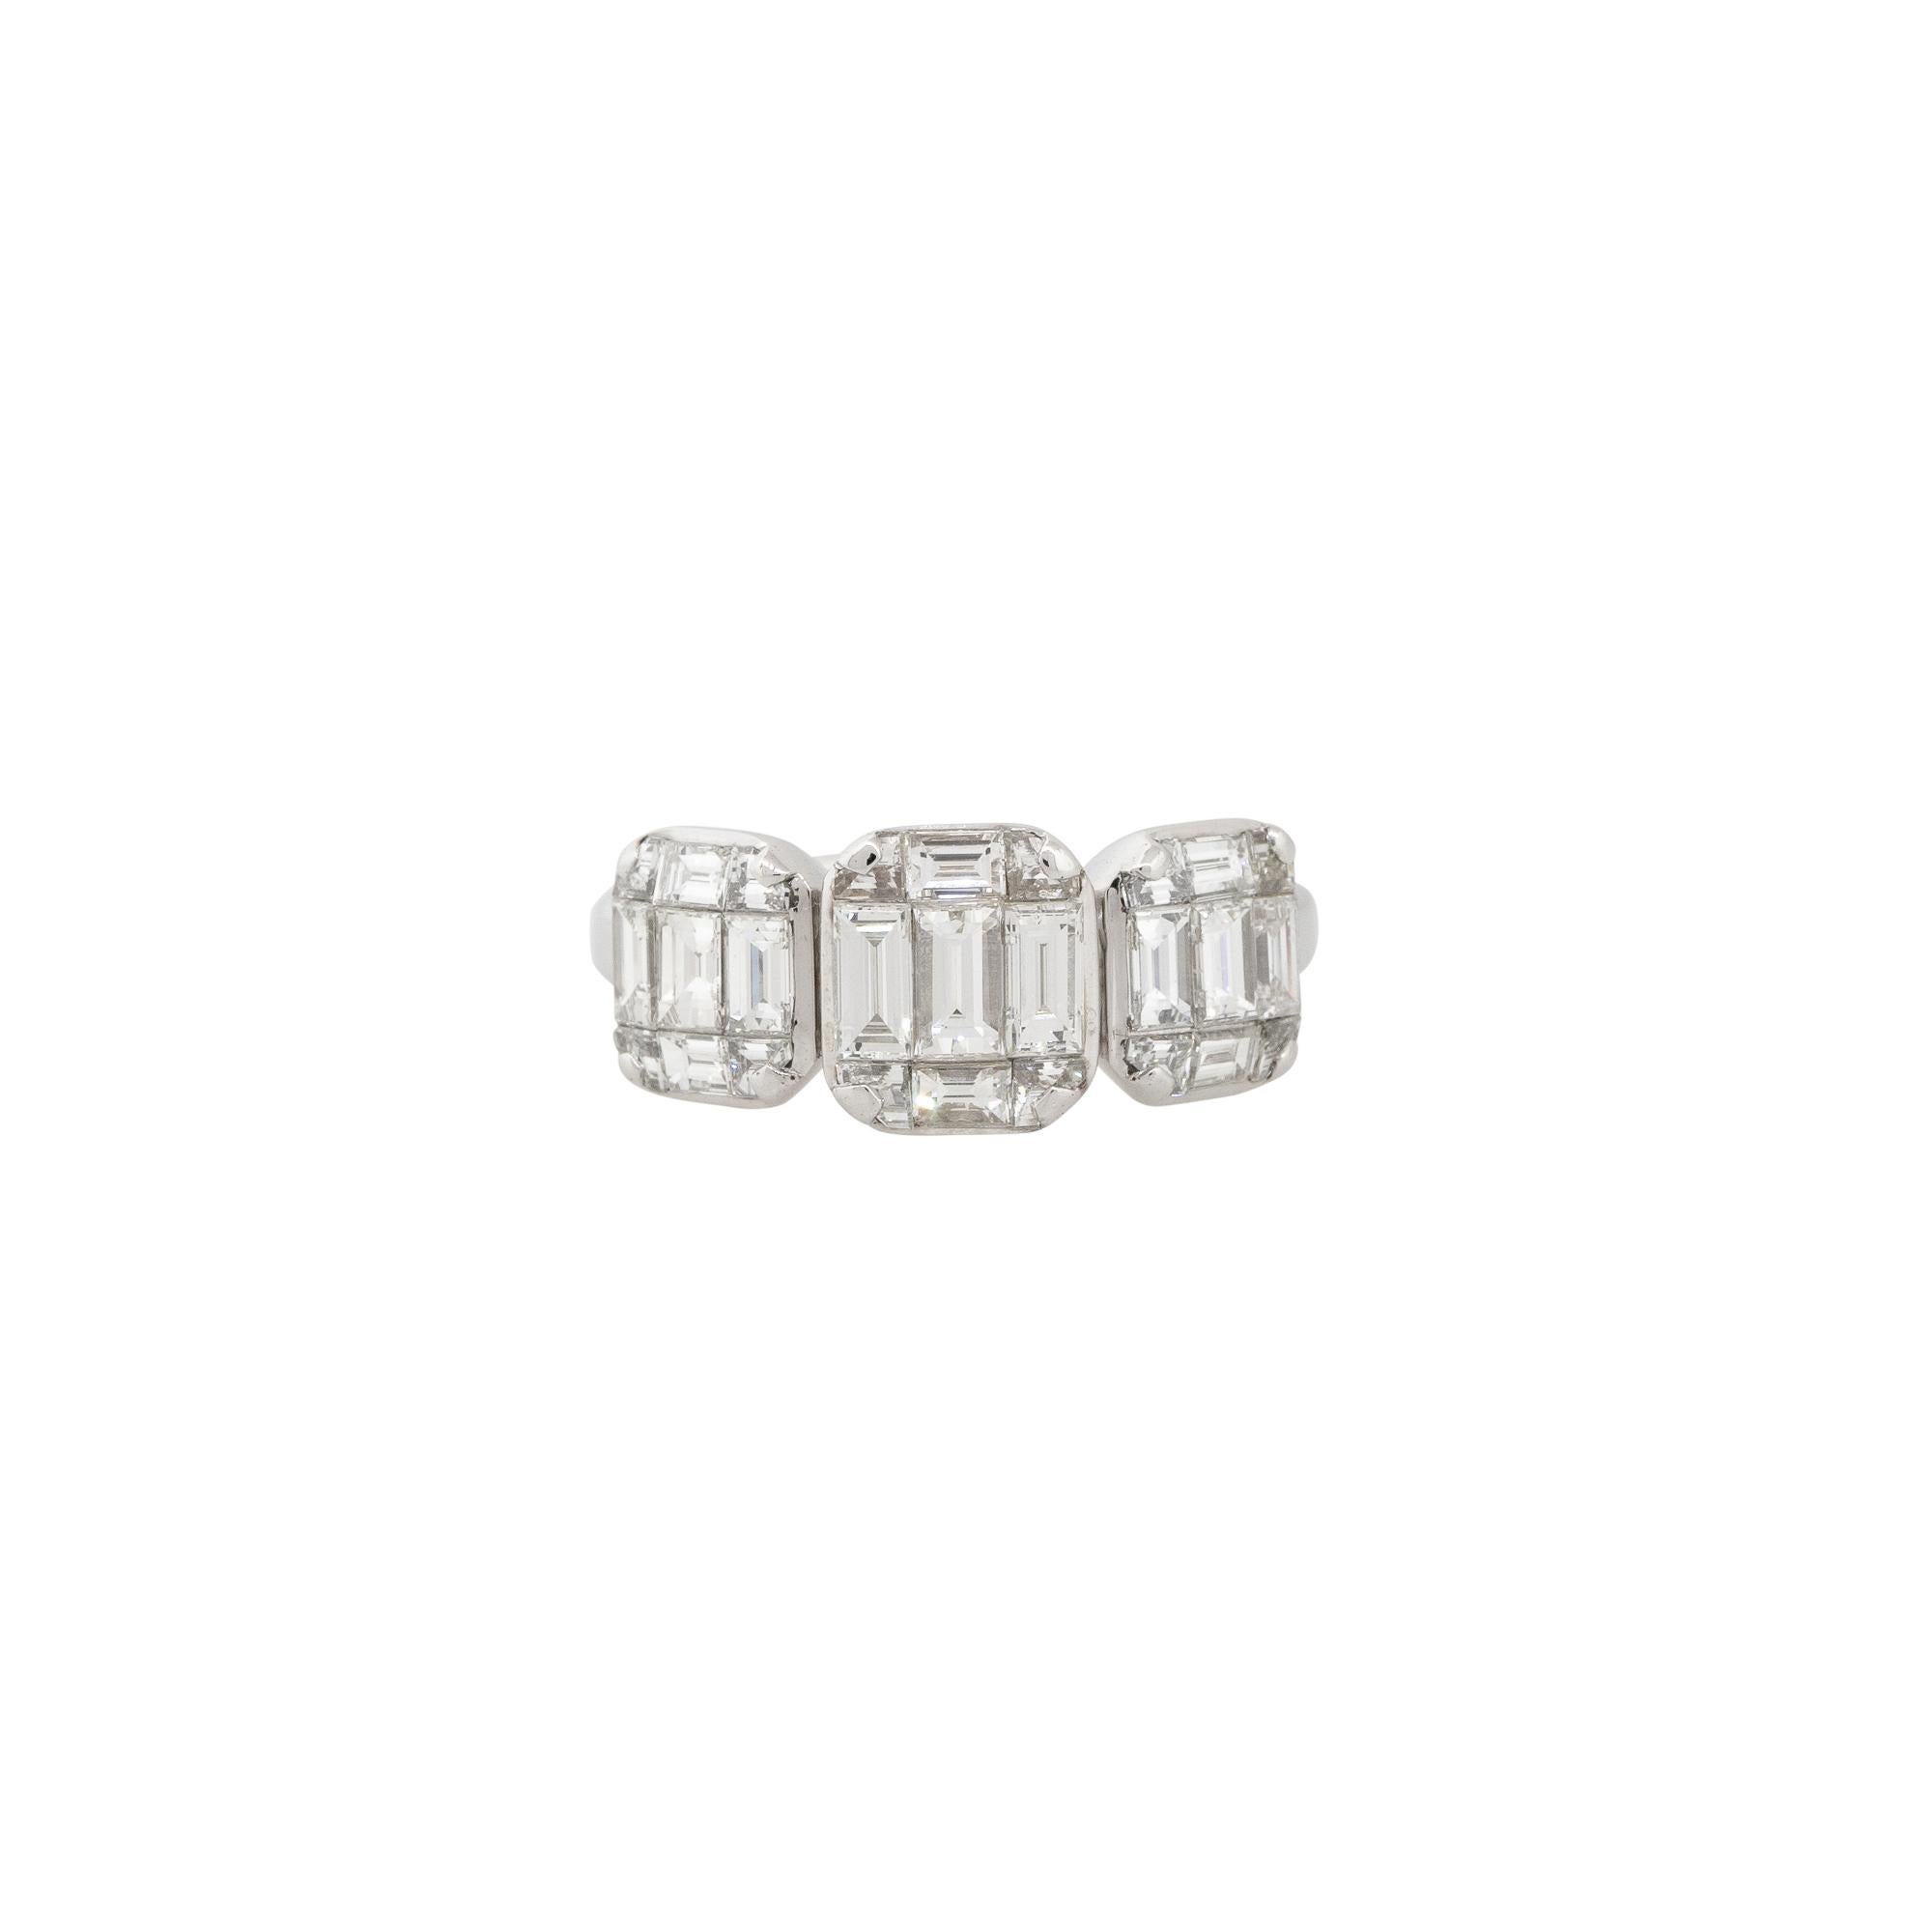 18k White Gold 2.81ctw Diamond 3 Station Ring
Style: Women's Diamond Mosaic Ring
Material: 18k White Gold
Main Diamond Details: Approximately 2.81ctw of mixed shape Diamonds. There are 3 square shaped diamond stations
Ring Size: 6.5 (Can be